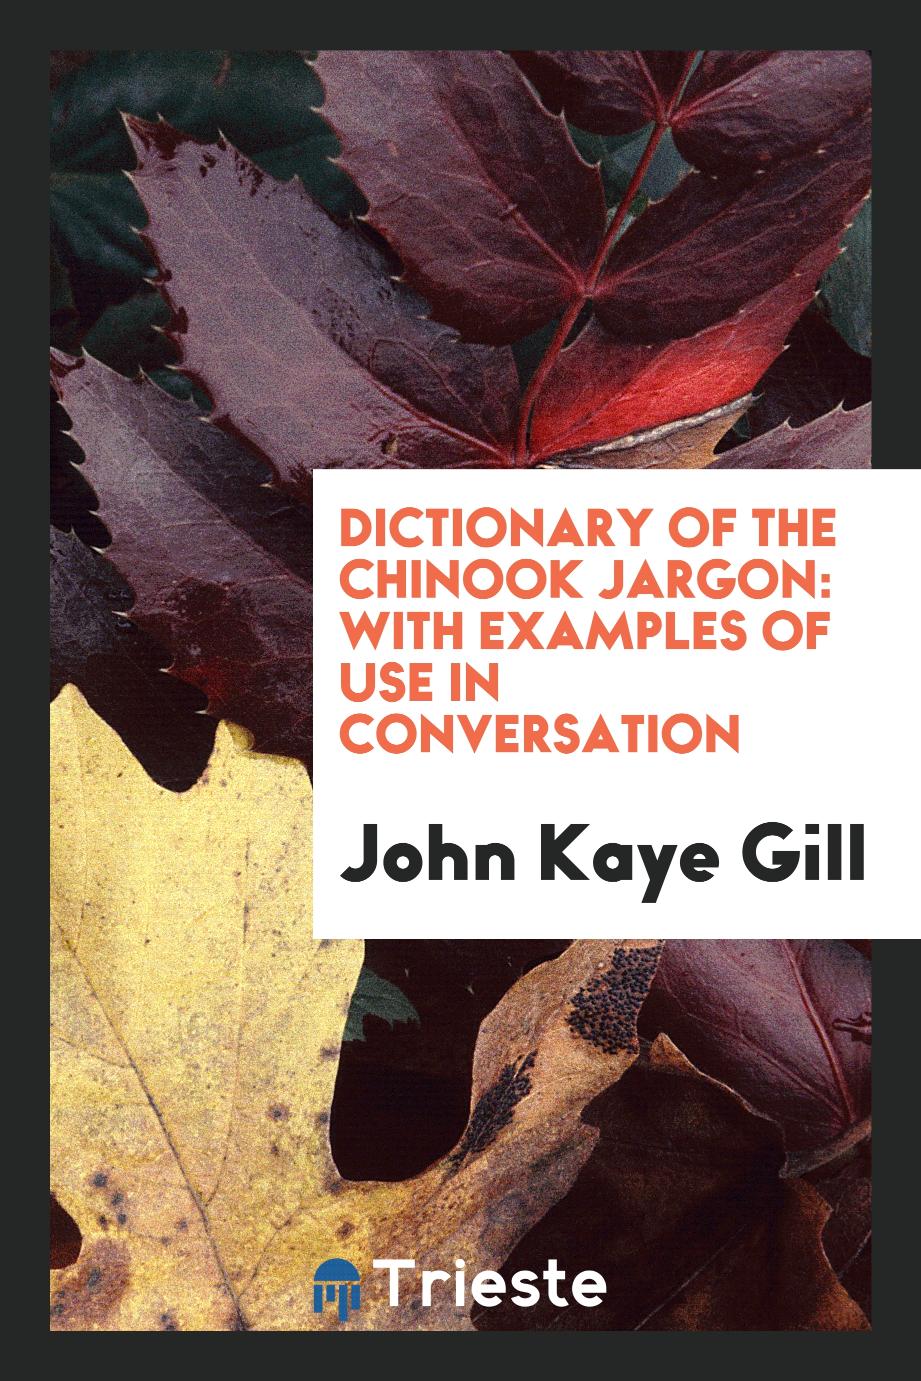 Dictionary of the chinook jargon: with examples of use in conversation